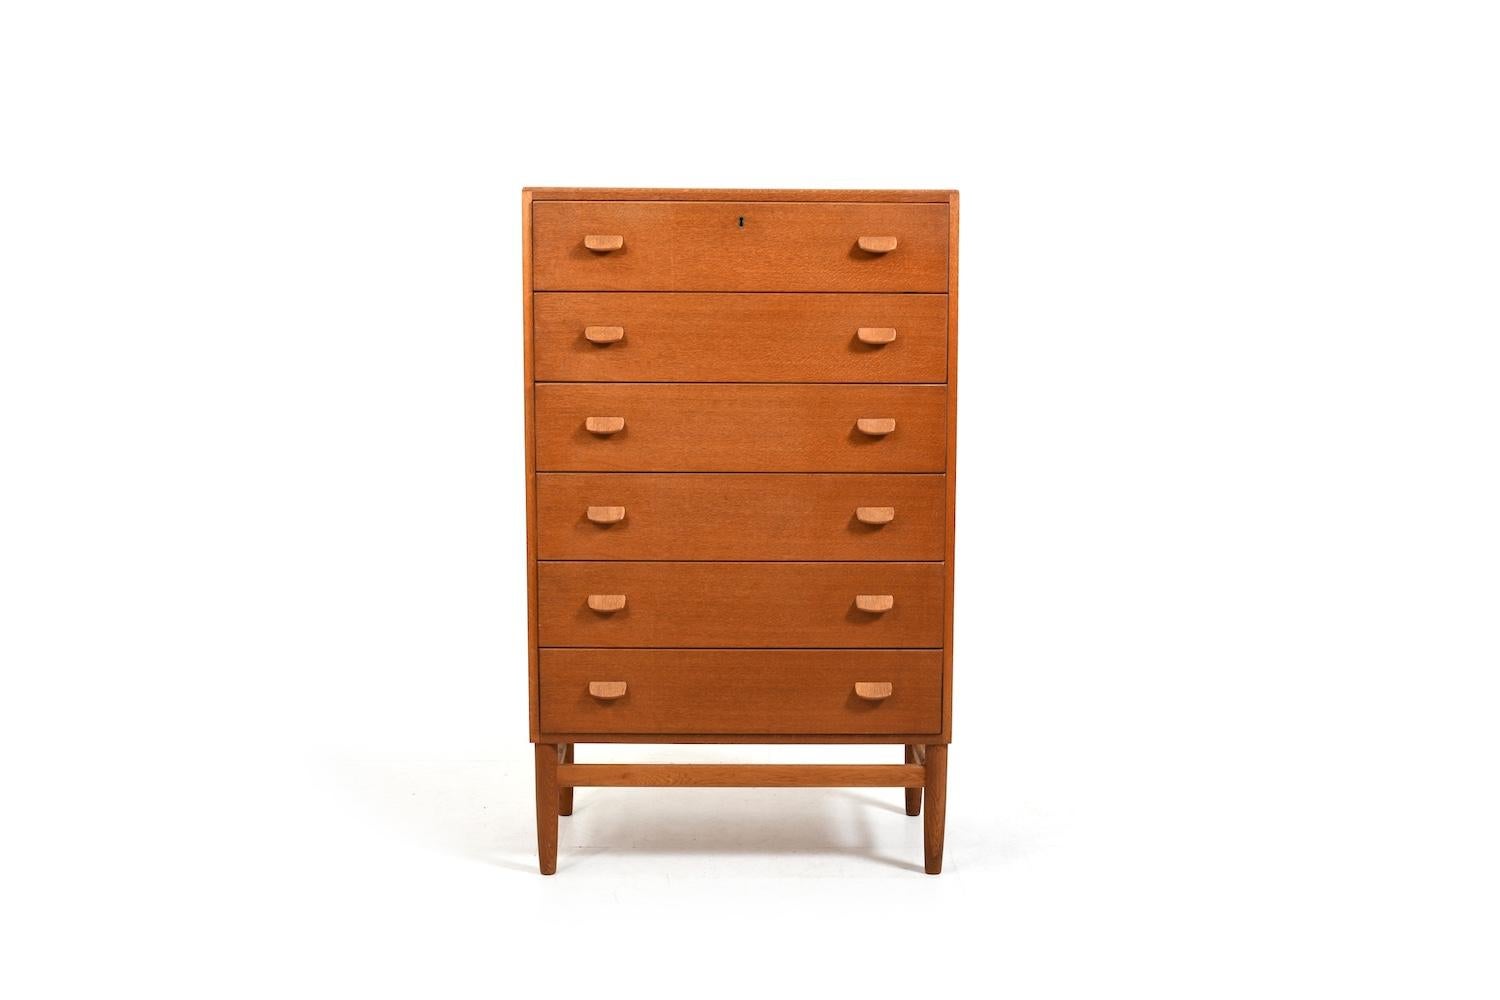 Tallboy chest of drawers in oak by Poul M. Volther for FDB Møbler 1950s. Model F-17. Front with 6 drawers.